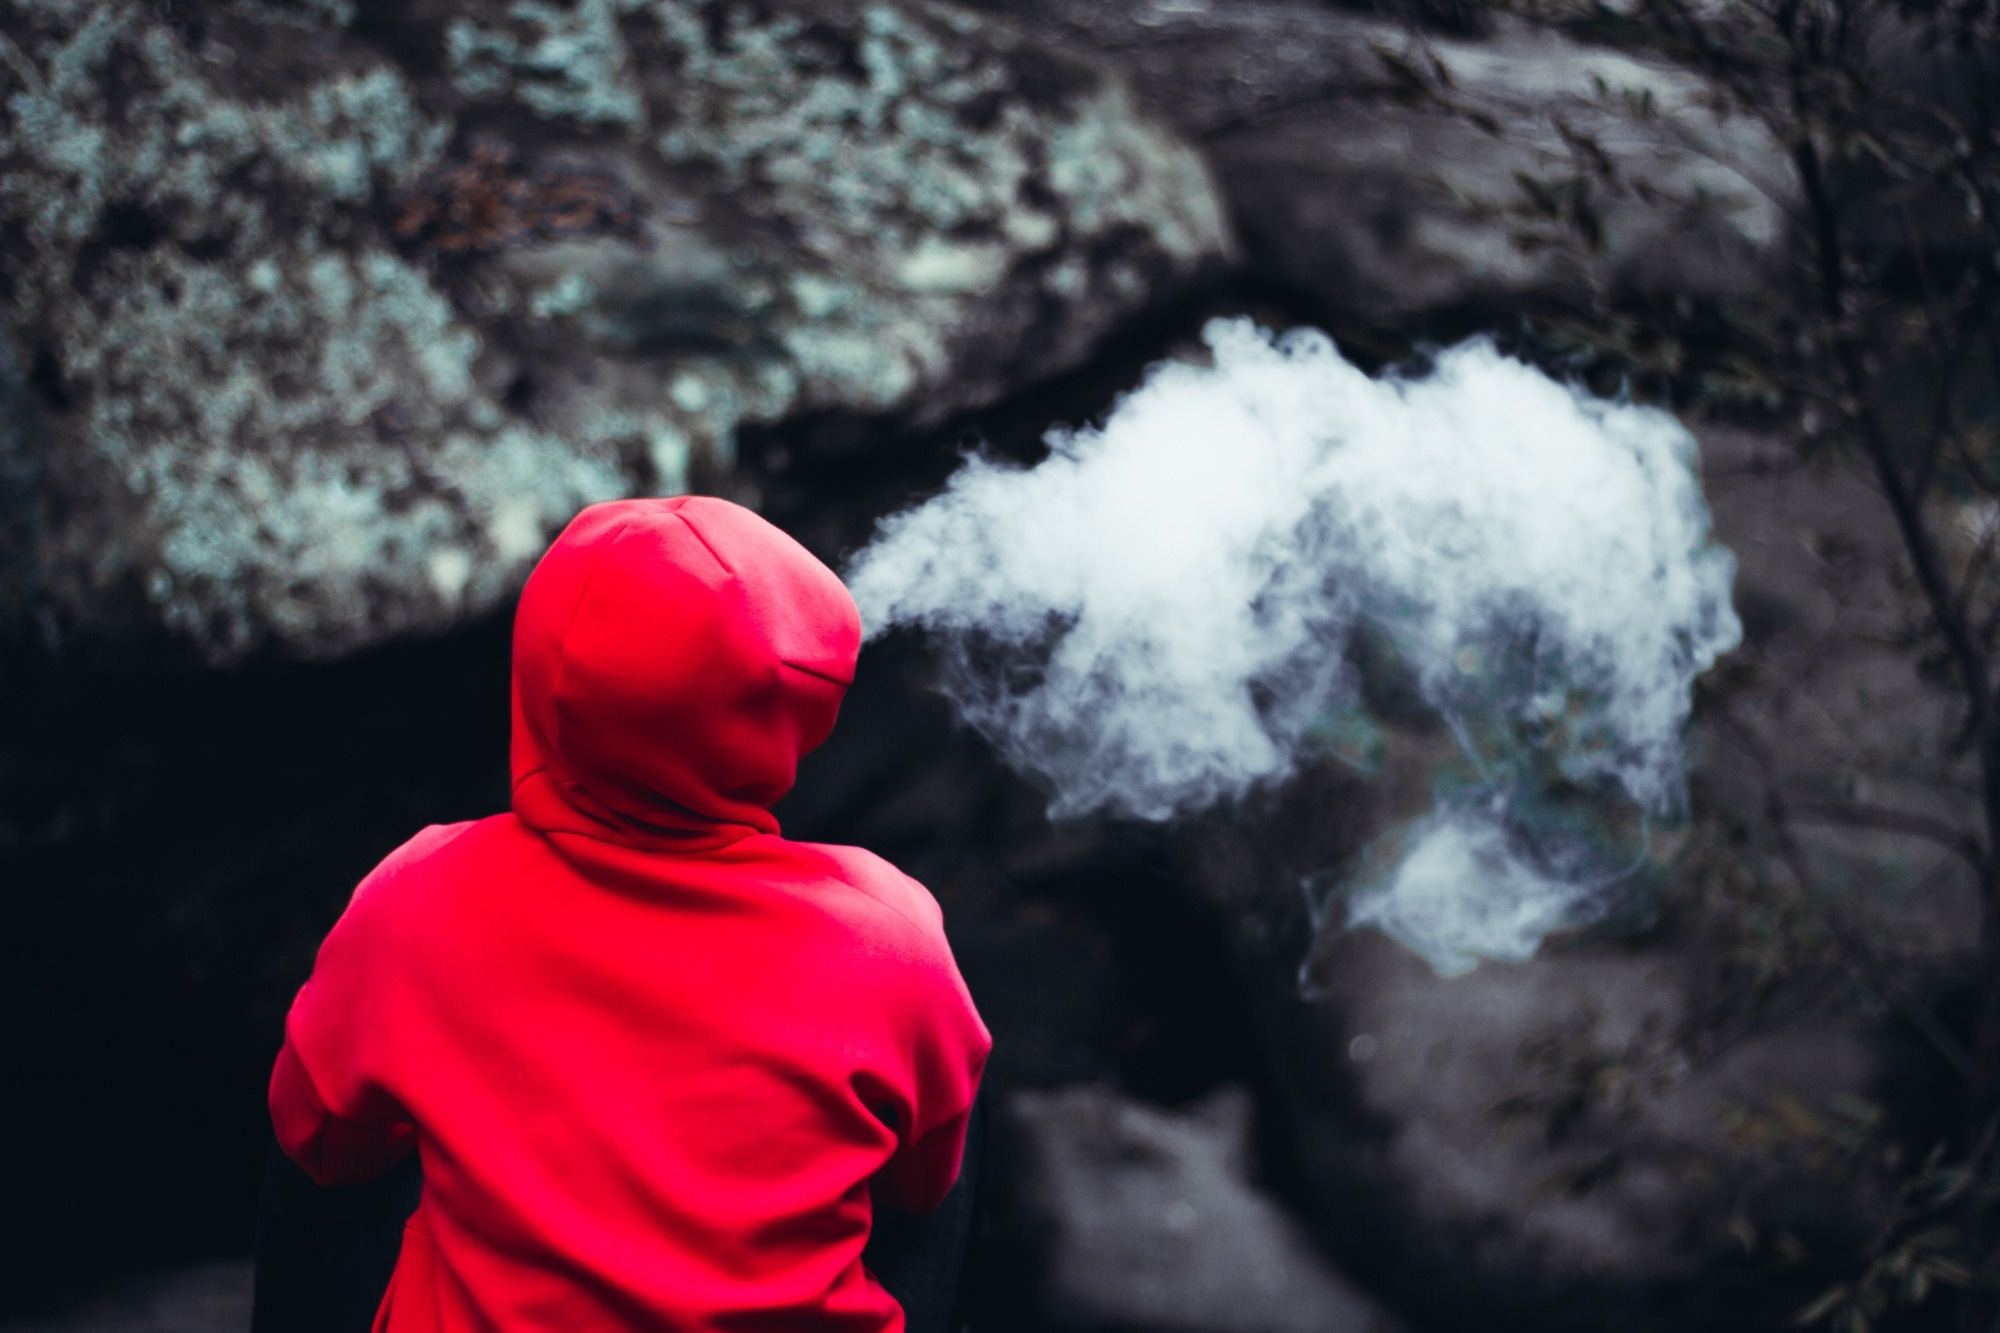 Teens talk vaping: A co-produced participatory study exploring teens’ reflections on vaping experiences and exposures in their everyday environments. Image Credit: Chawanwit Photo / Shutterstock